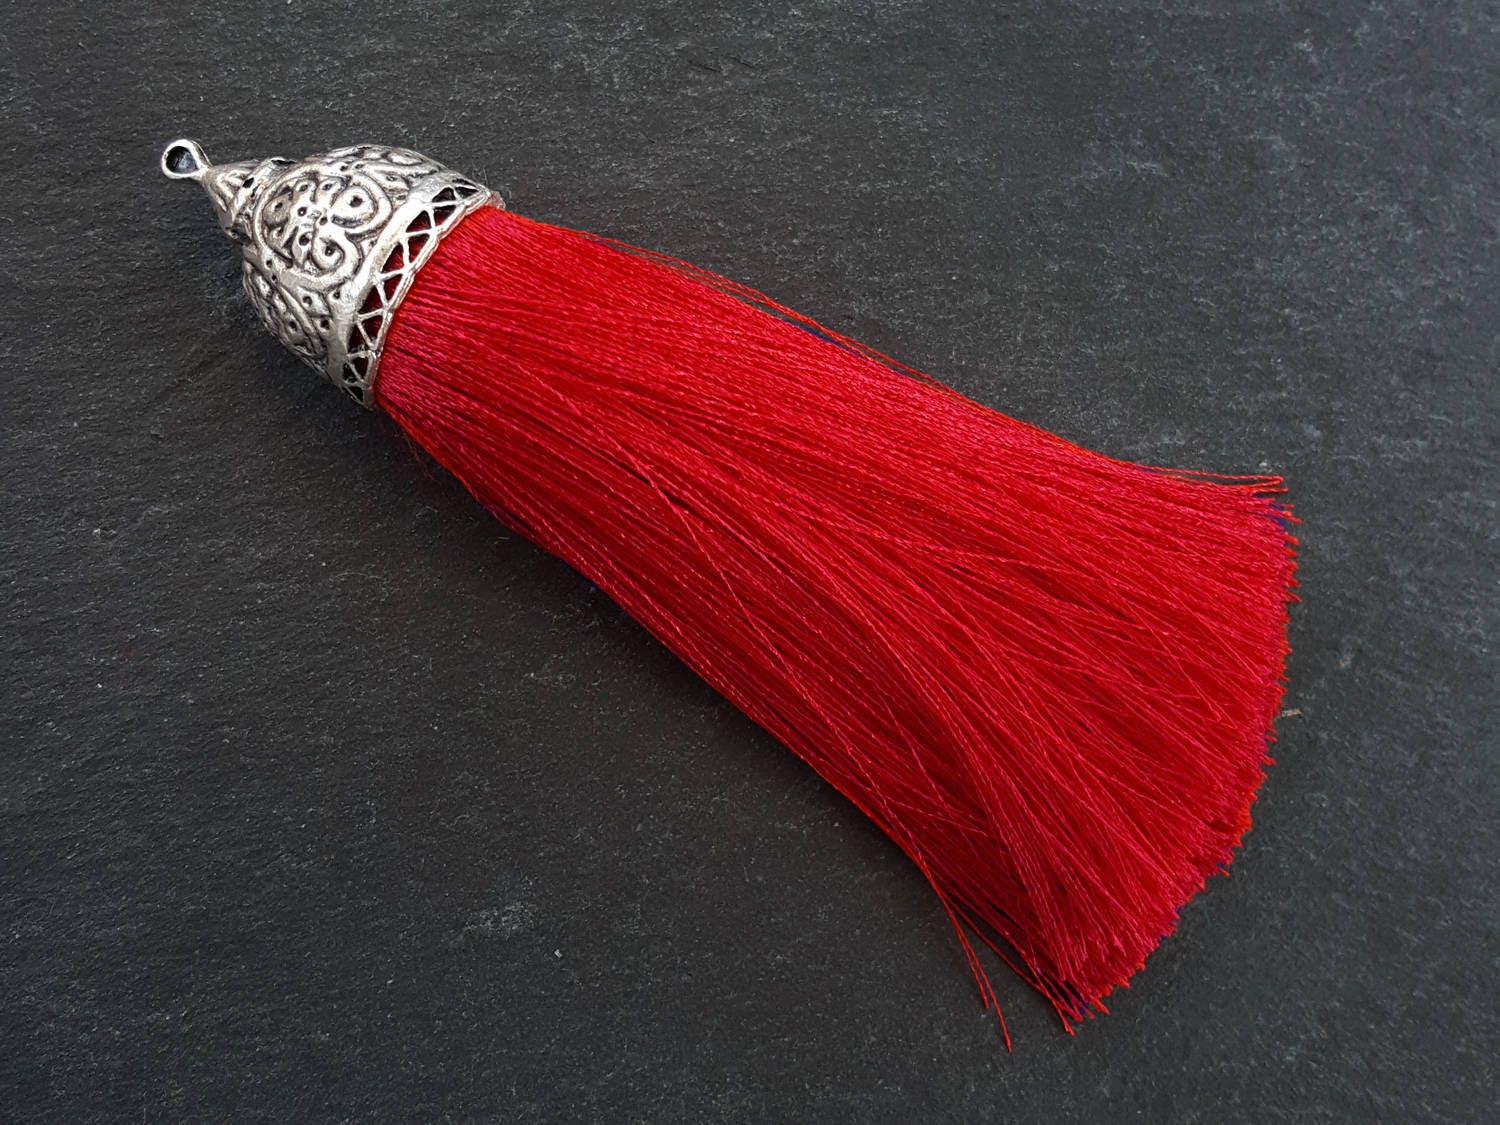 Extra Large Thick Red Silk Thread Tassel Pendant with Ornate Silver Plated Cap Jewelry Supplies - 4.6 inches - 117mm - 1 pc